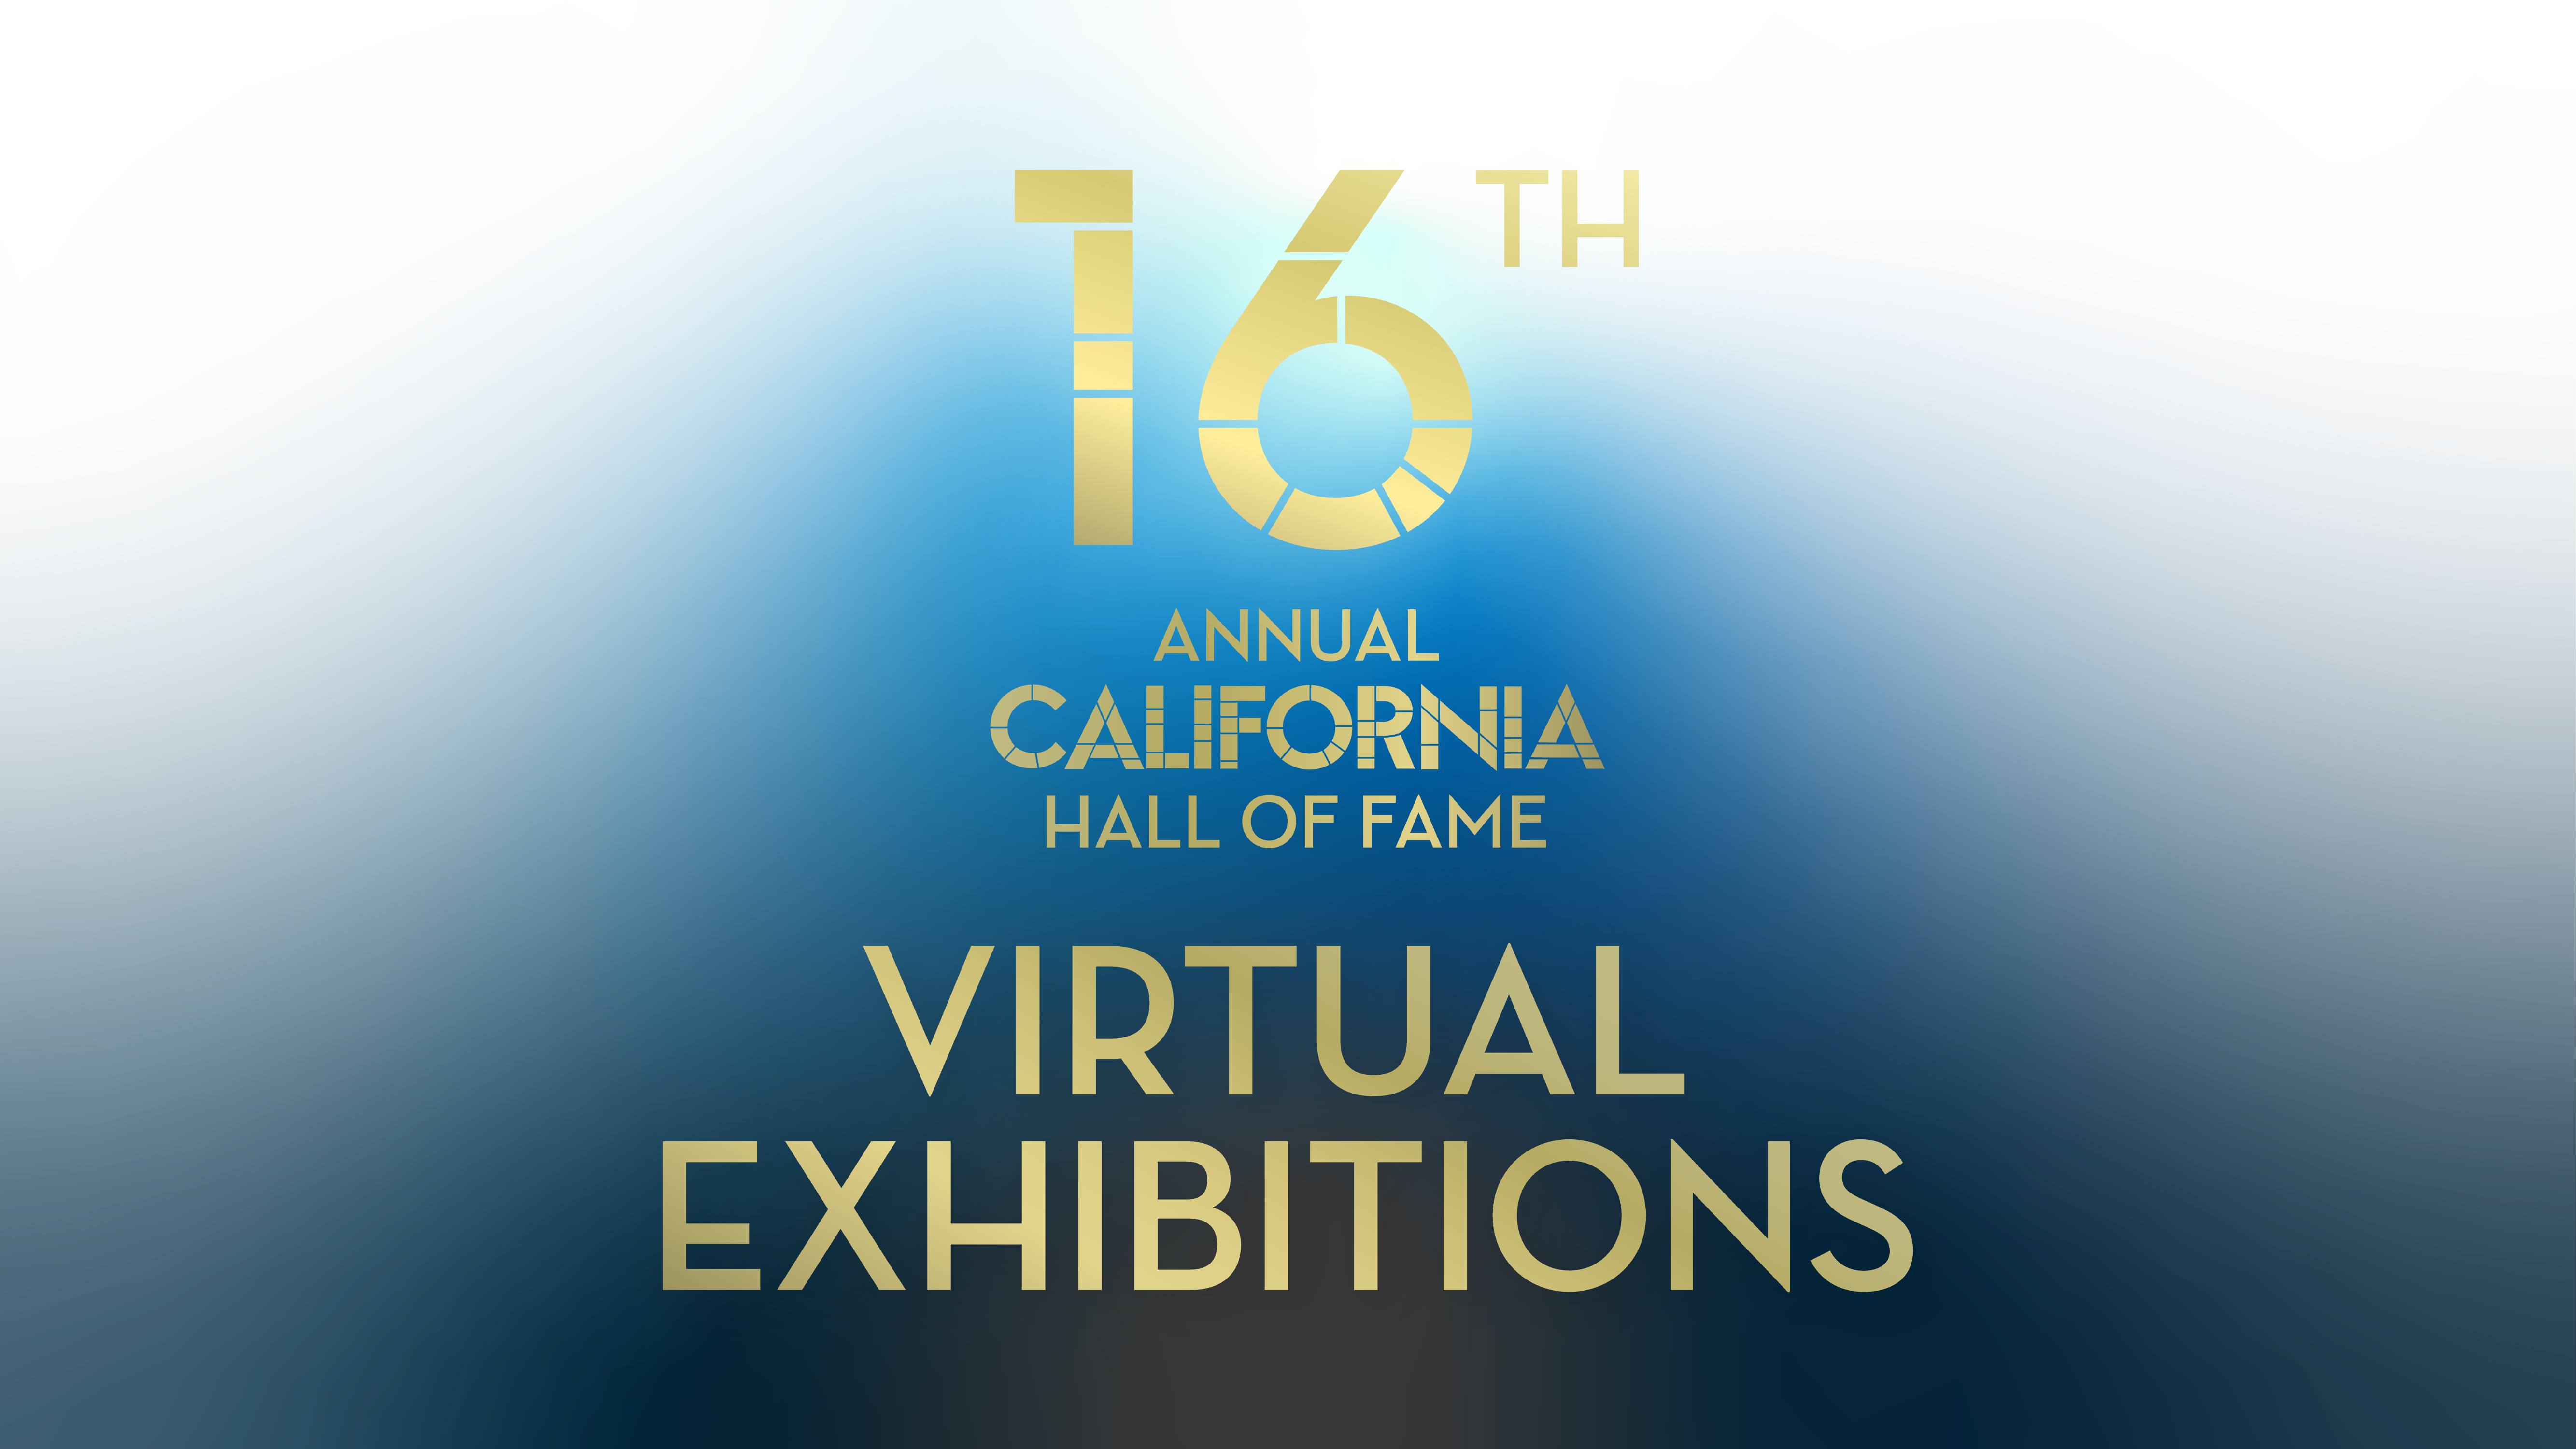 Graphic logo reading "16th Annual California Hall of Fame Virtual Exhibitions"